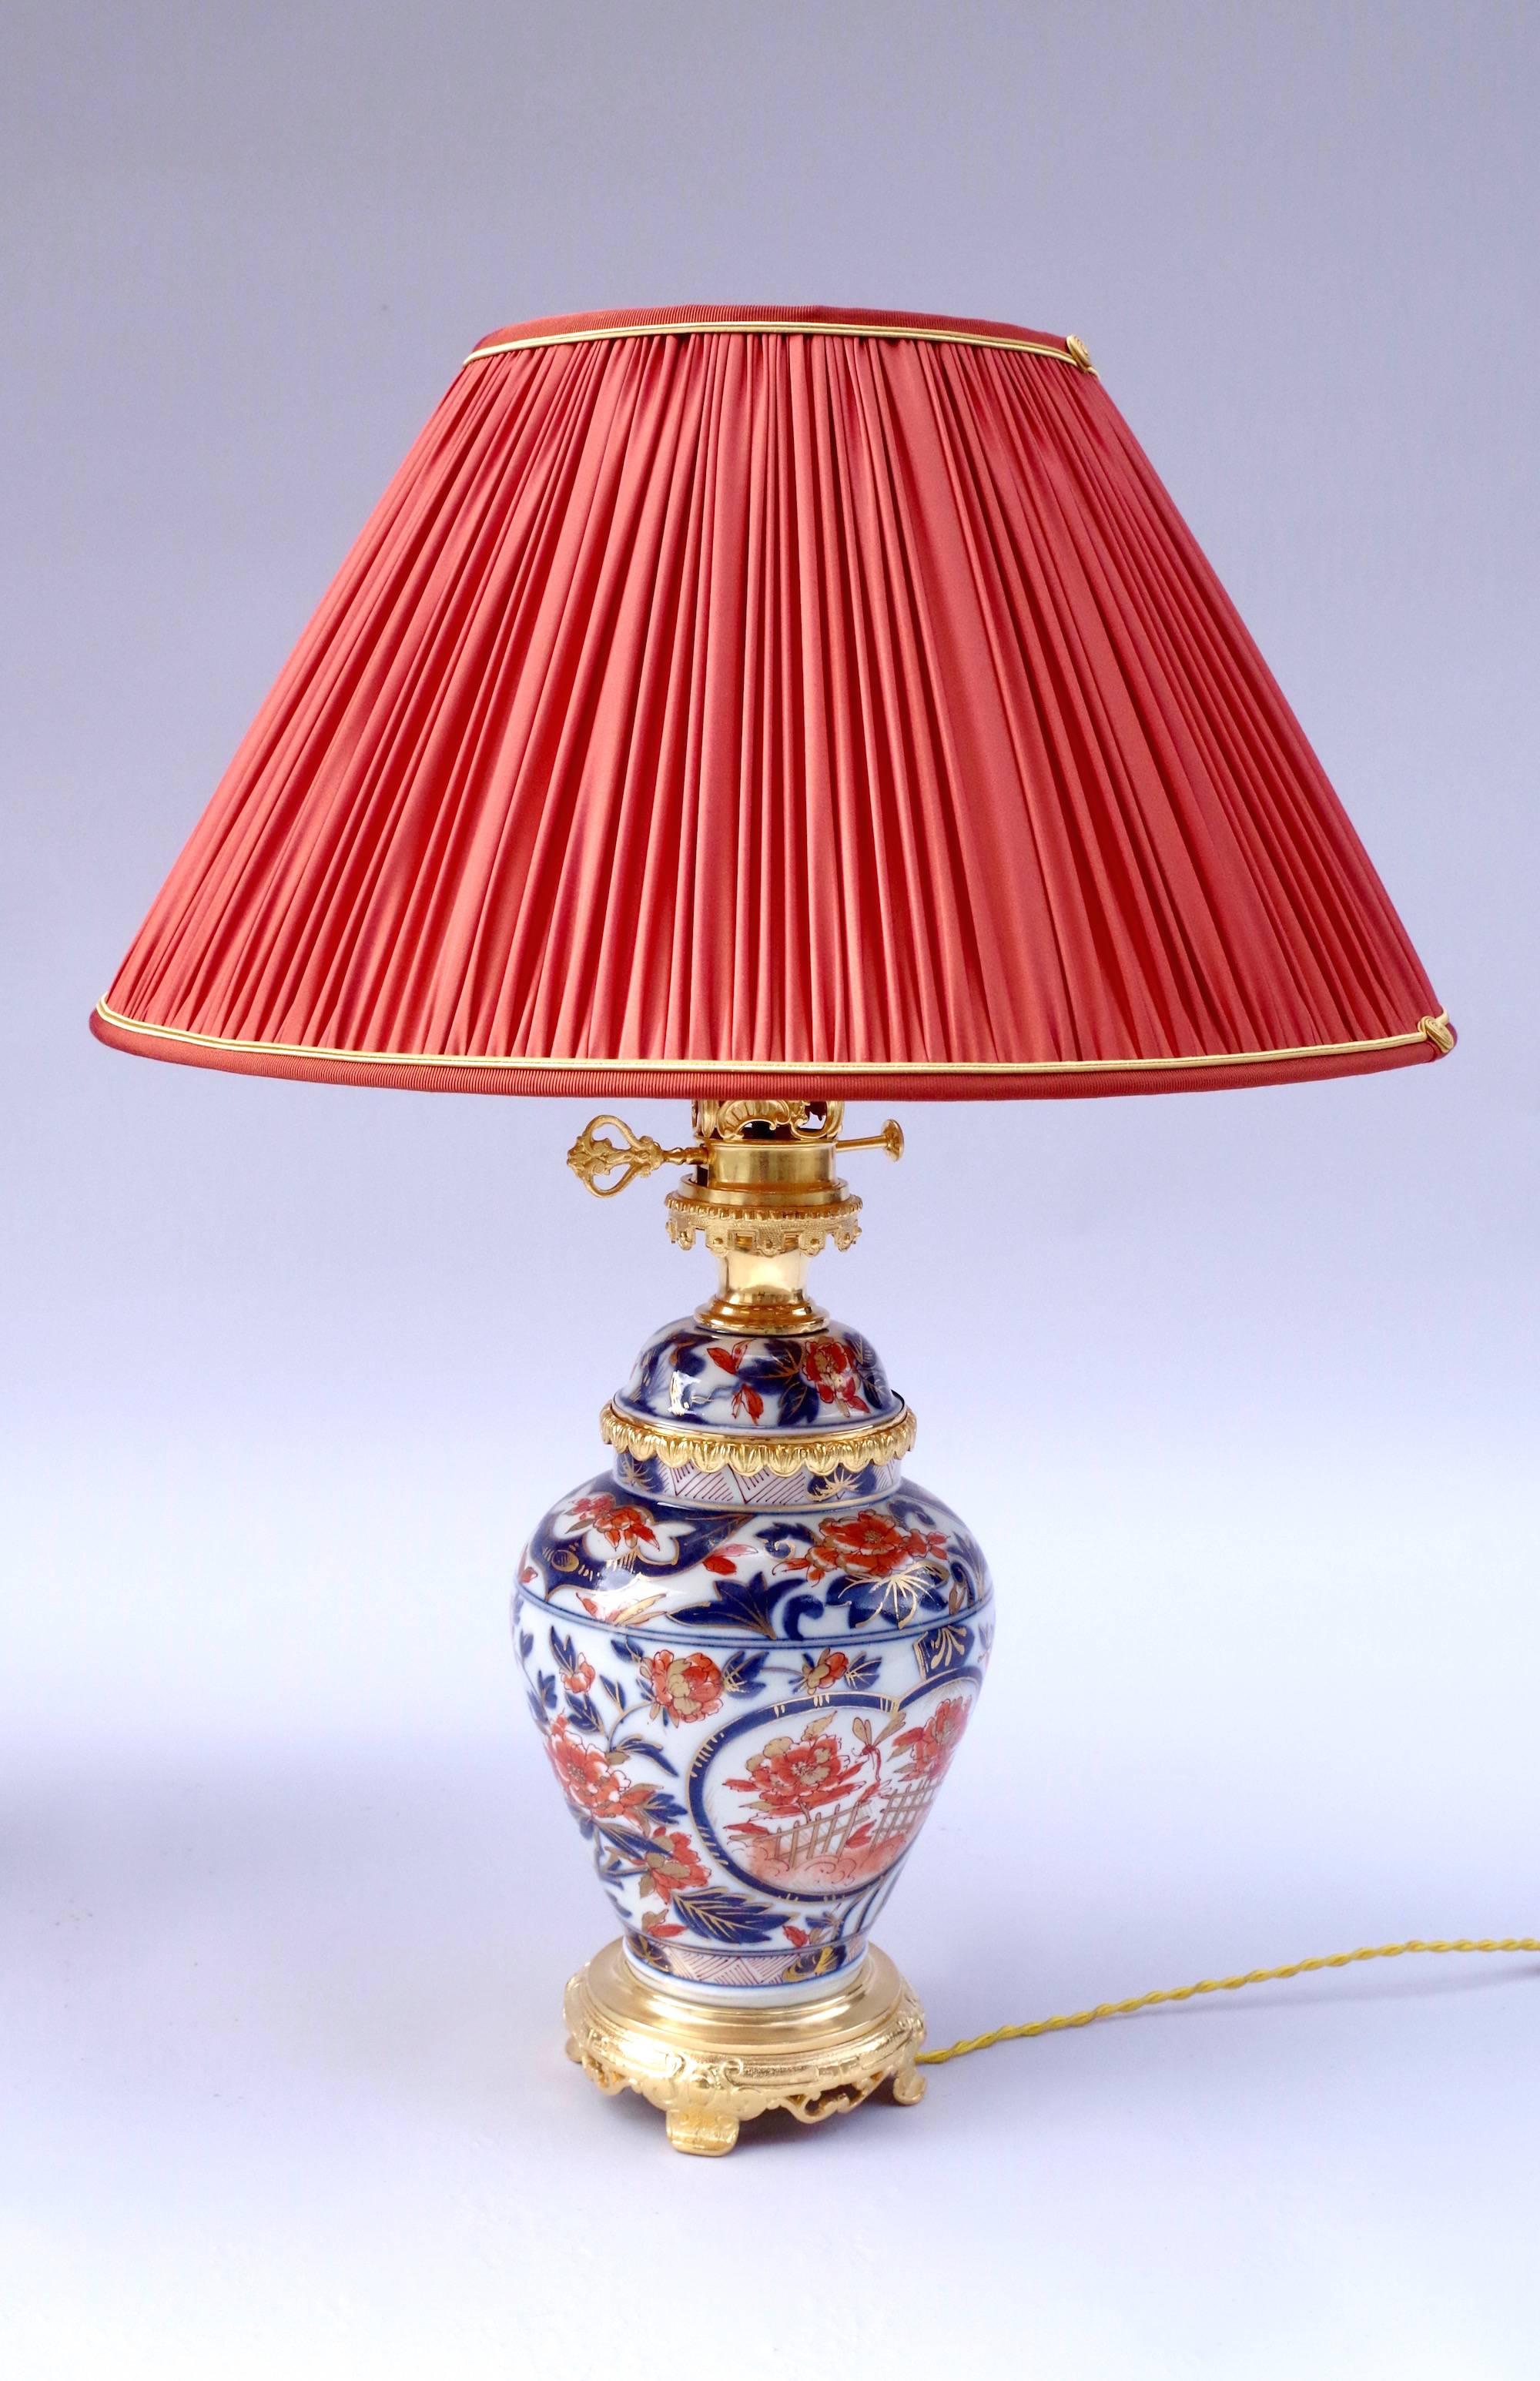 Pair of Bayeux porcelain lamps, vase shaped, mounted in gilt bronze.
Porcelains are decorated in the Imari way, with blue and red. The composition of the decoration is made with a main pattern of baskets of flowers, with red tones, in a cartouche